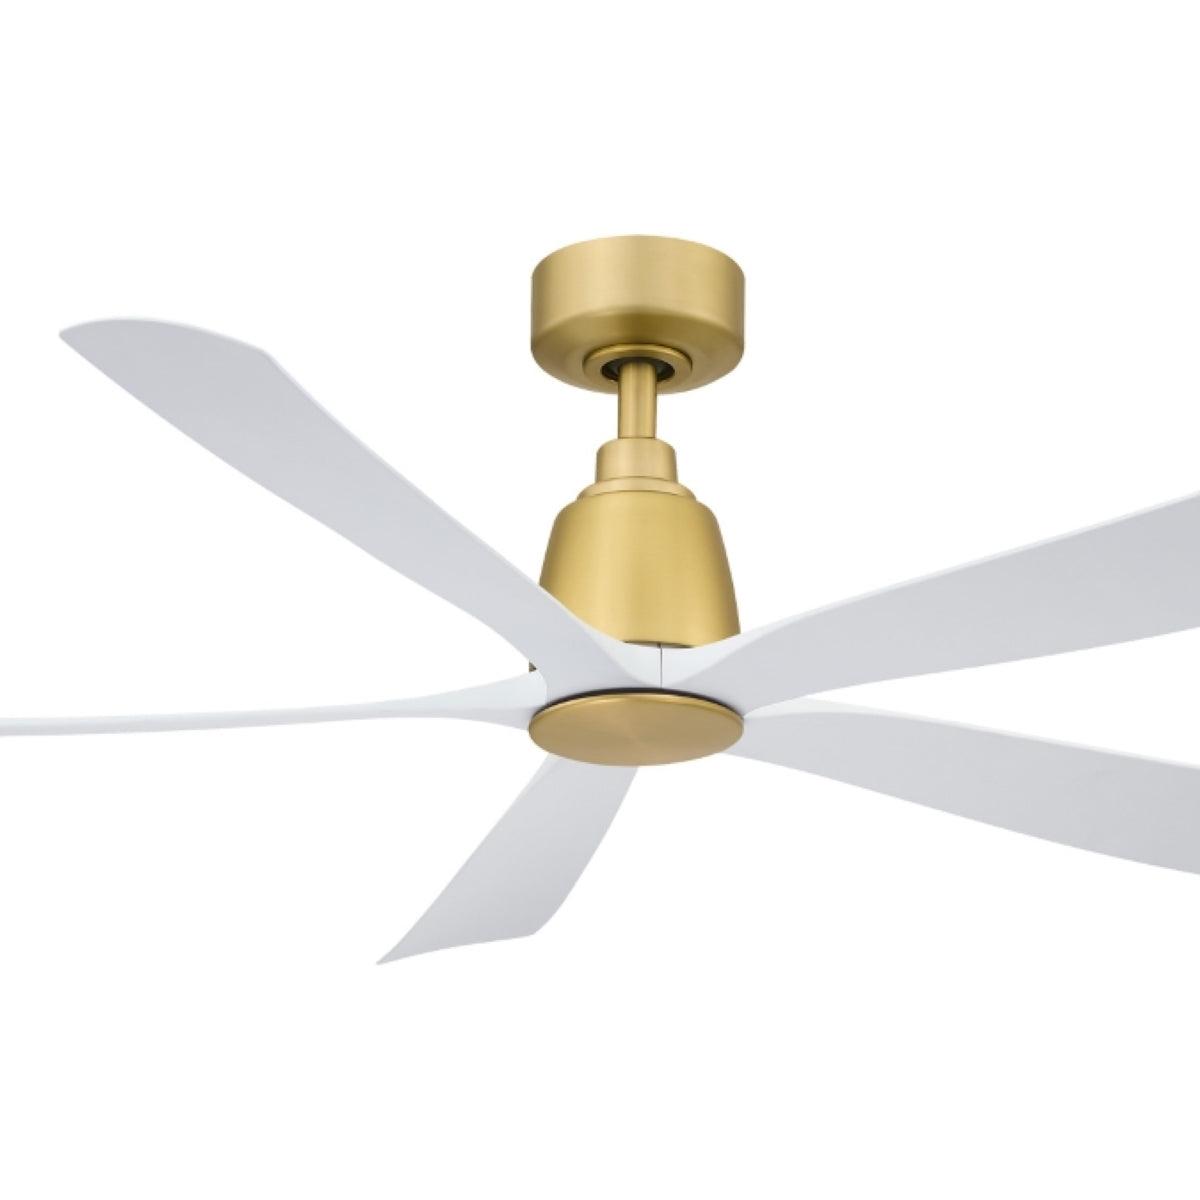 Kute5 52 Inch 5 Blades Indoor/Outdoor Ceiling Fan With Remote